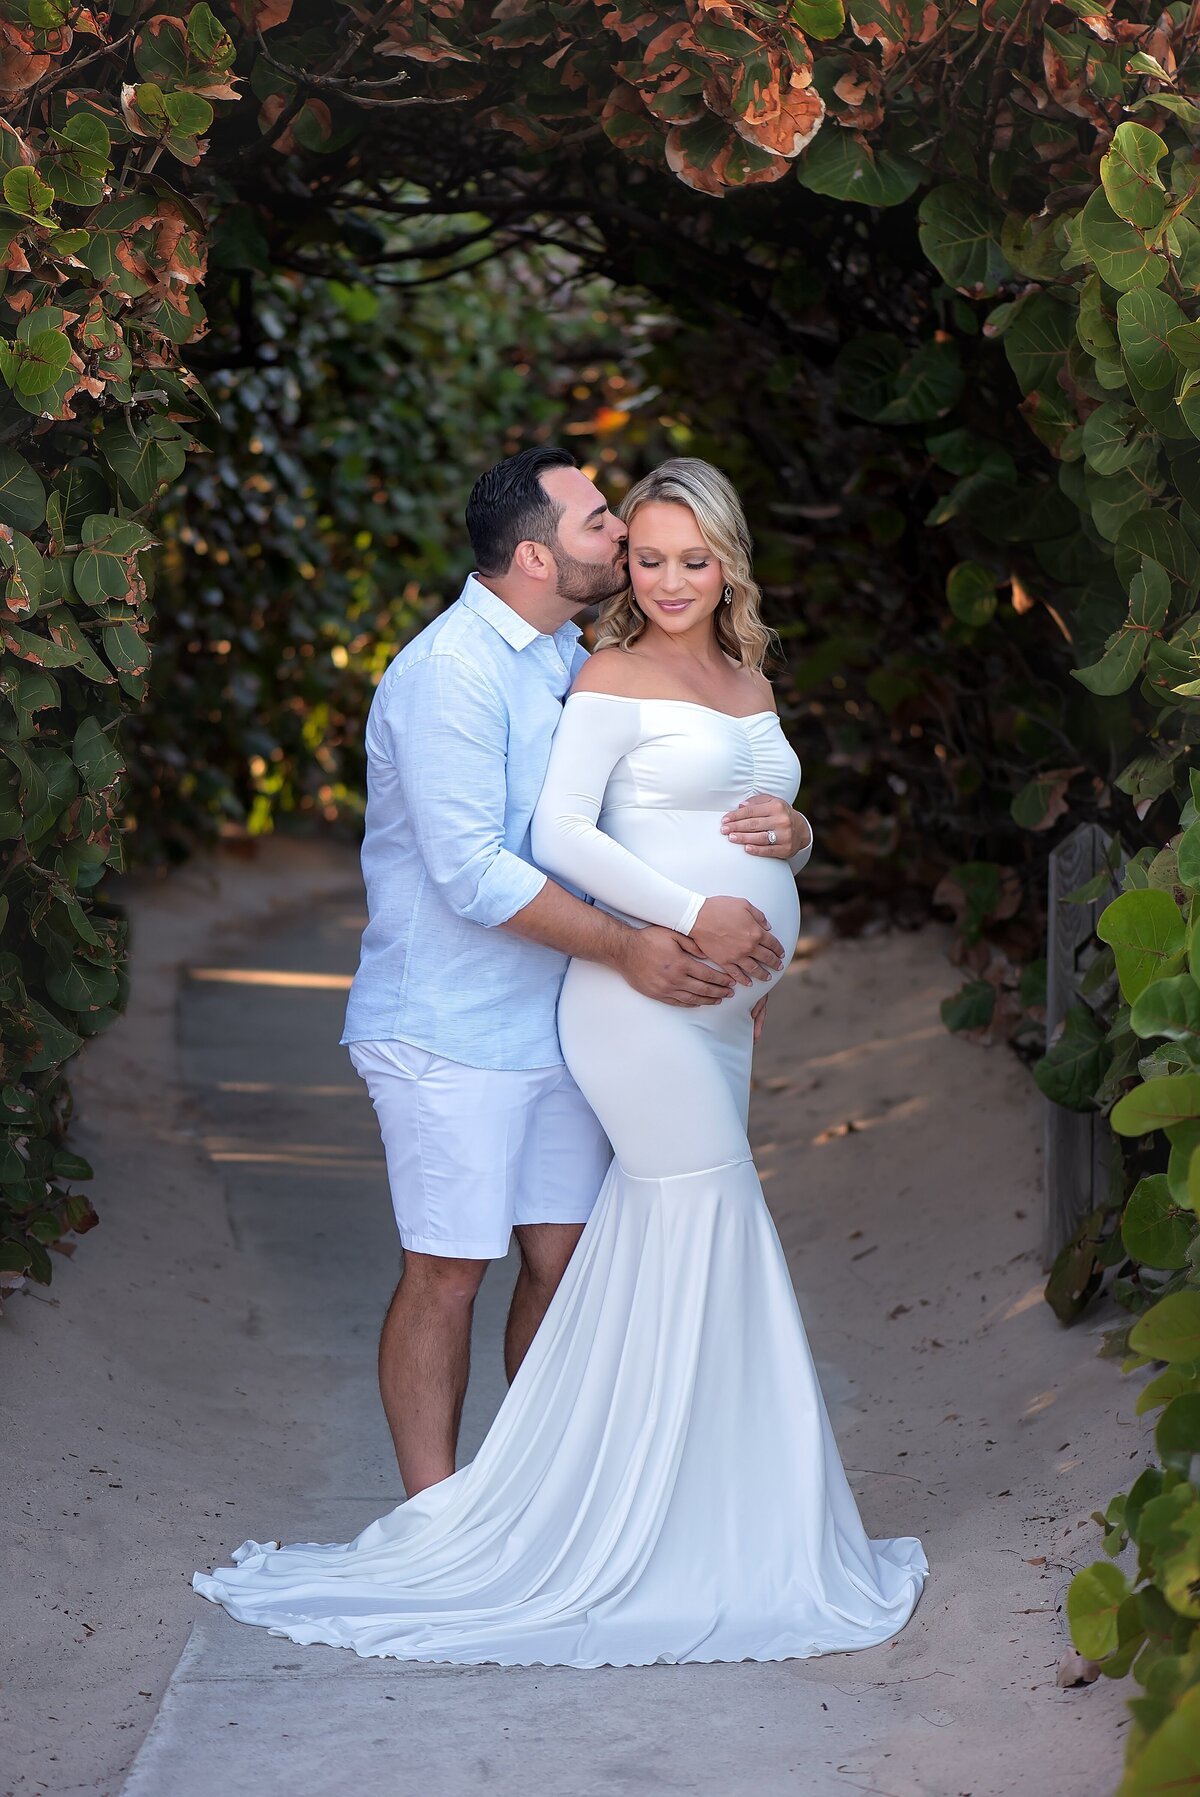 maternity couple at the beach with greenery